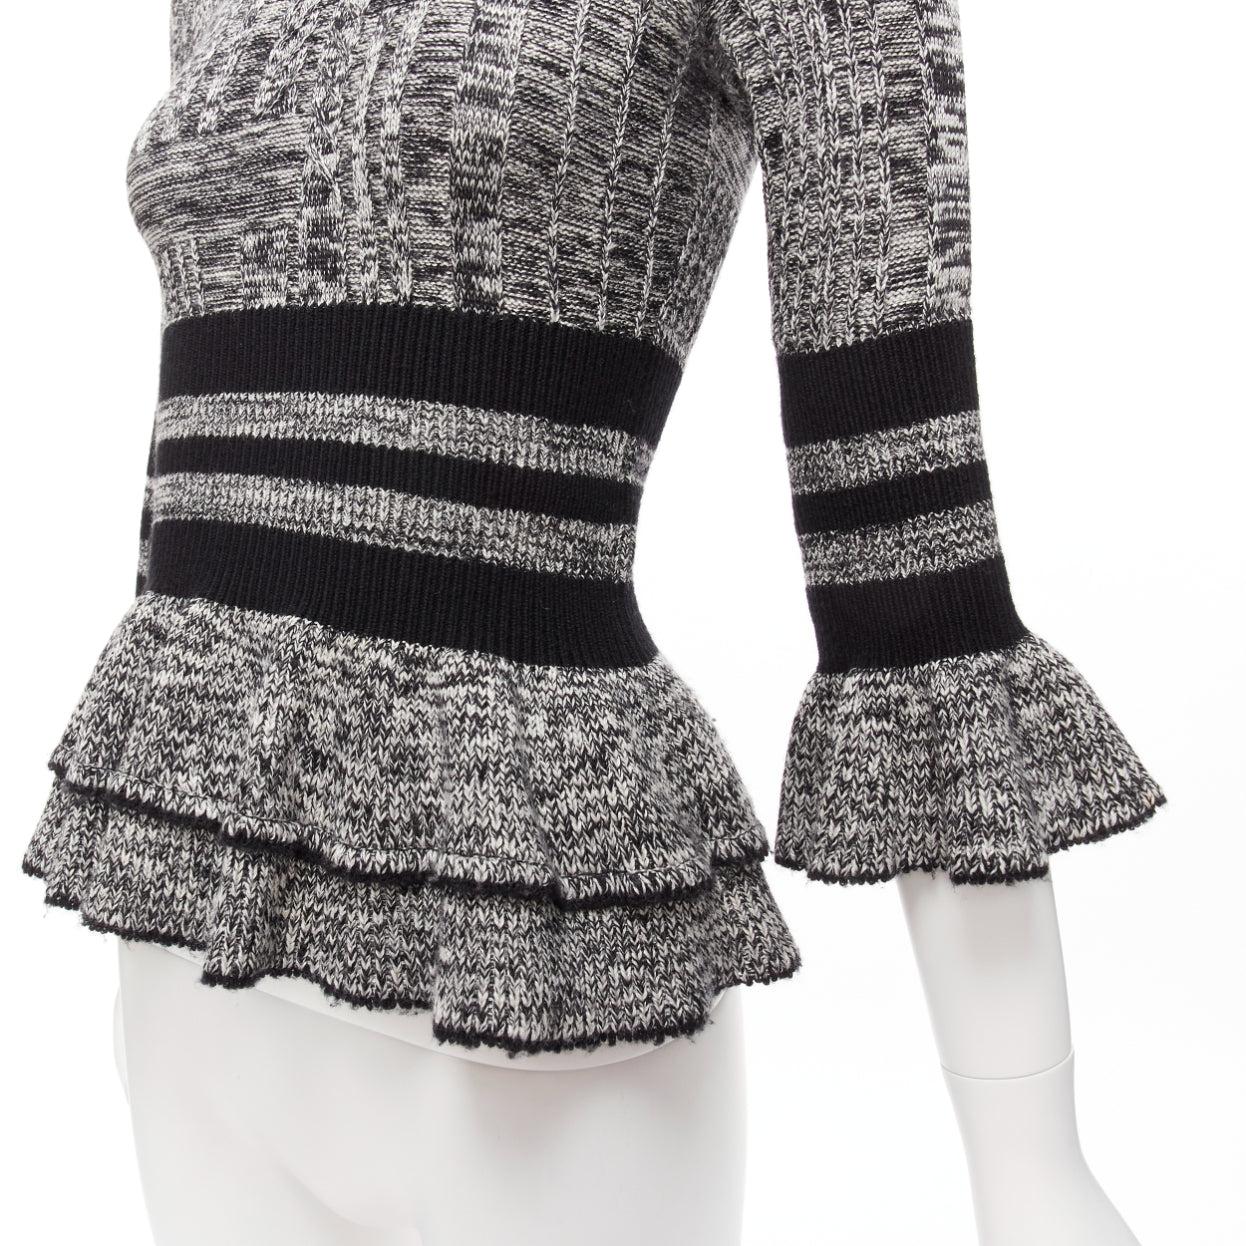 ALEXANDER MCQUEEN grey wool silk grey melange peplum pullover sweater S
Reference: TGAS/D01058
Brand: Alexander McQueen
Material: Wool, Silk, Blend
Color: Grey, Black
Pattern: Striped
Closure: Keyhole Button
Extra Details: Keyhole back.
Made in: